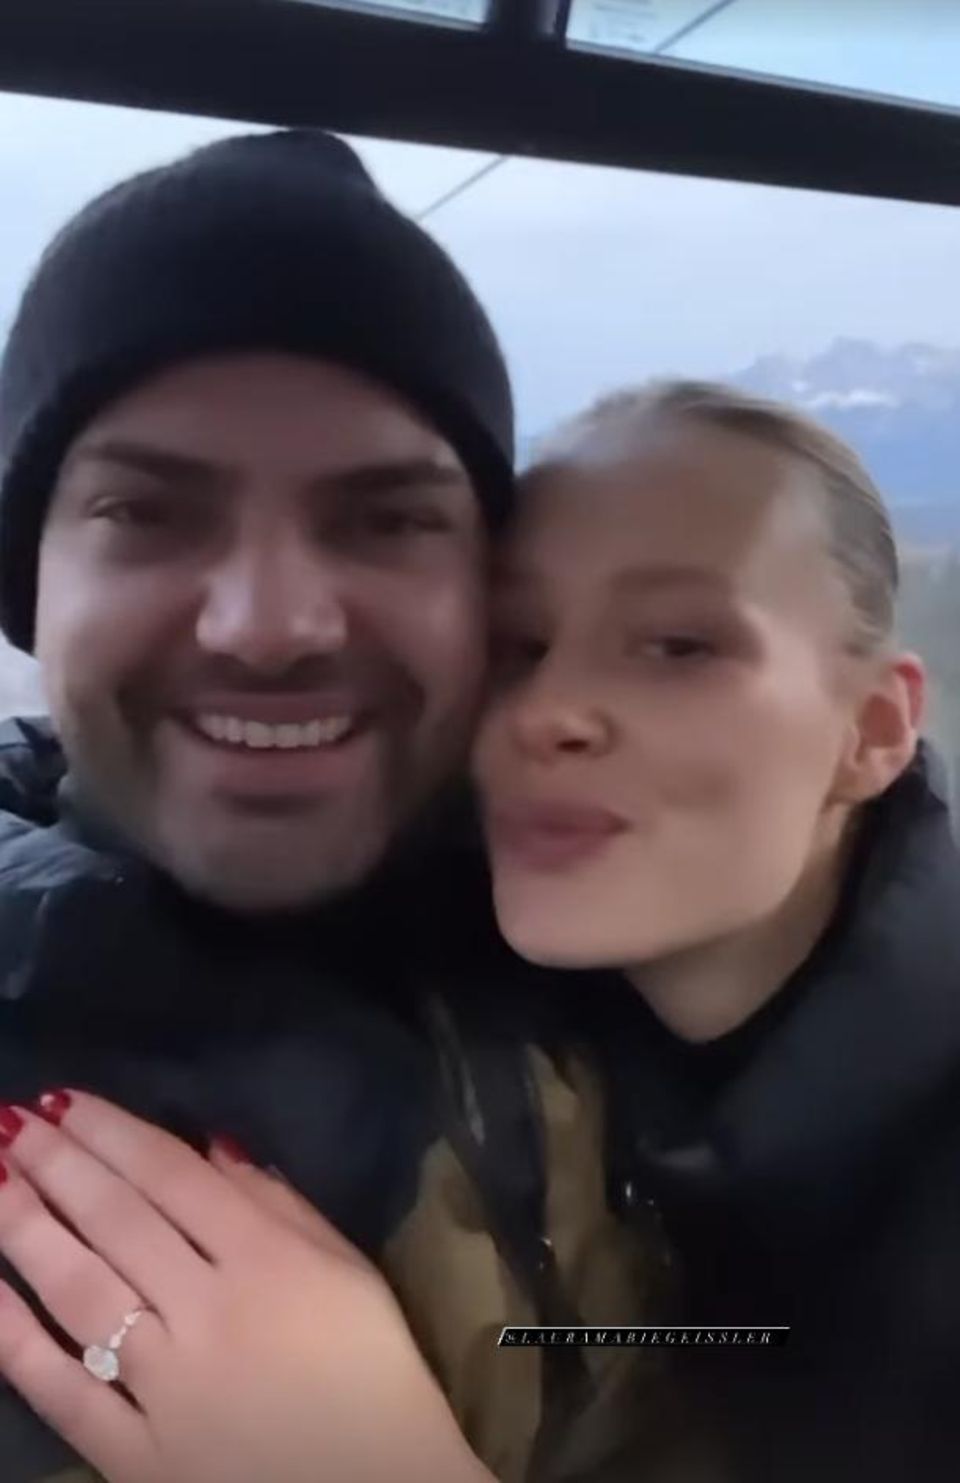 Johannes + Jessica Haller: They are moving out of their house in Ibiza